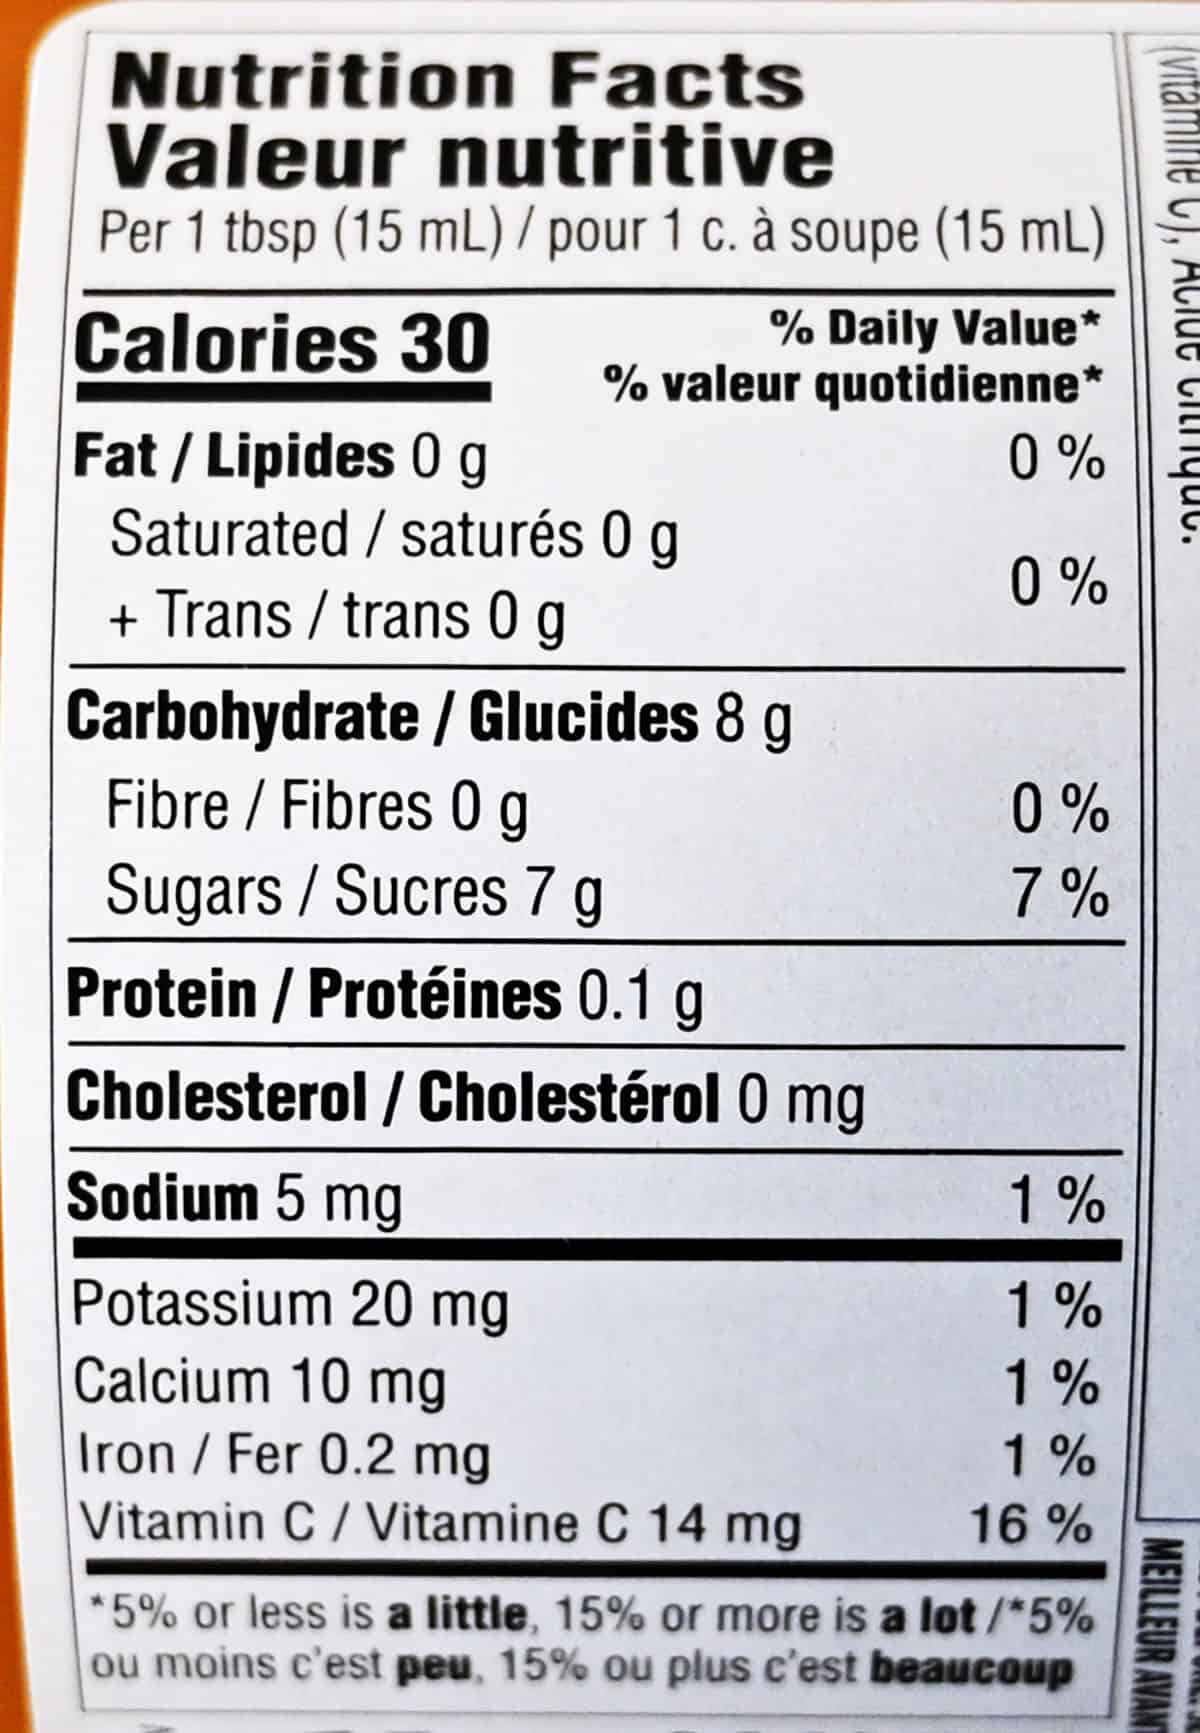 Nutrition facts label from the back of the jar of spread.